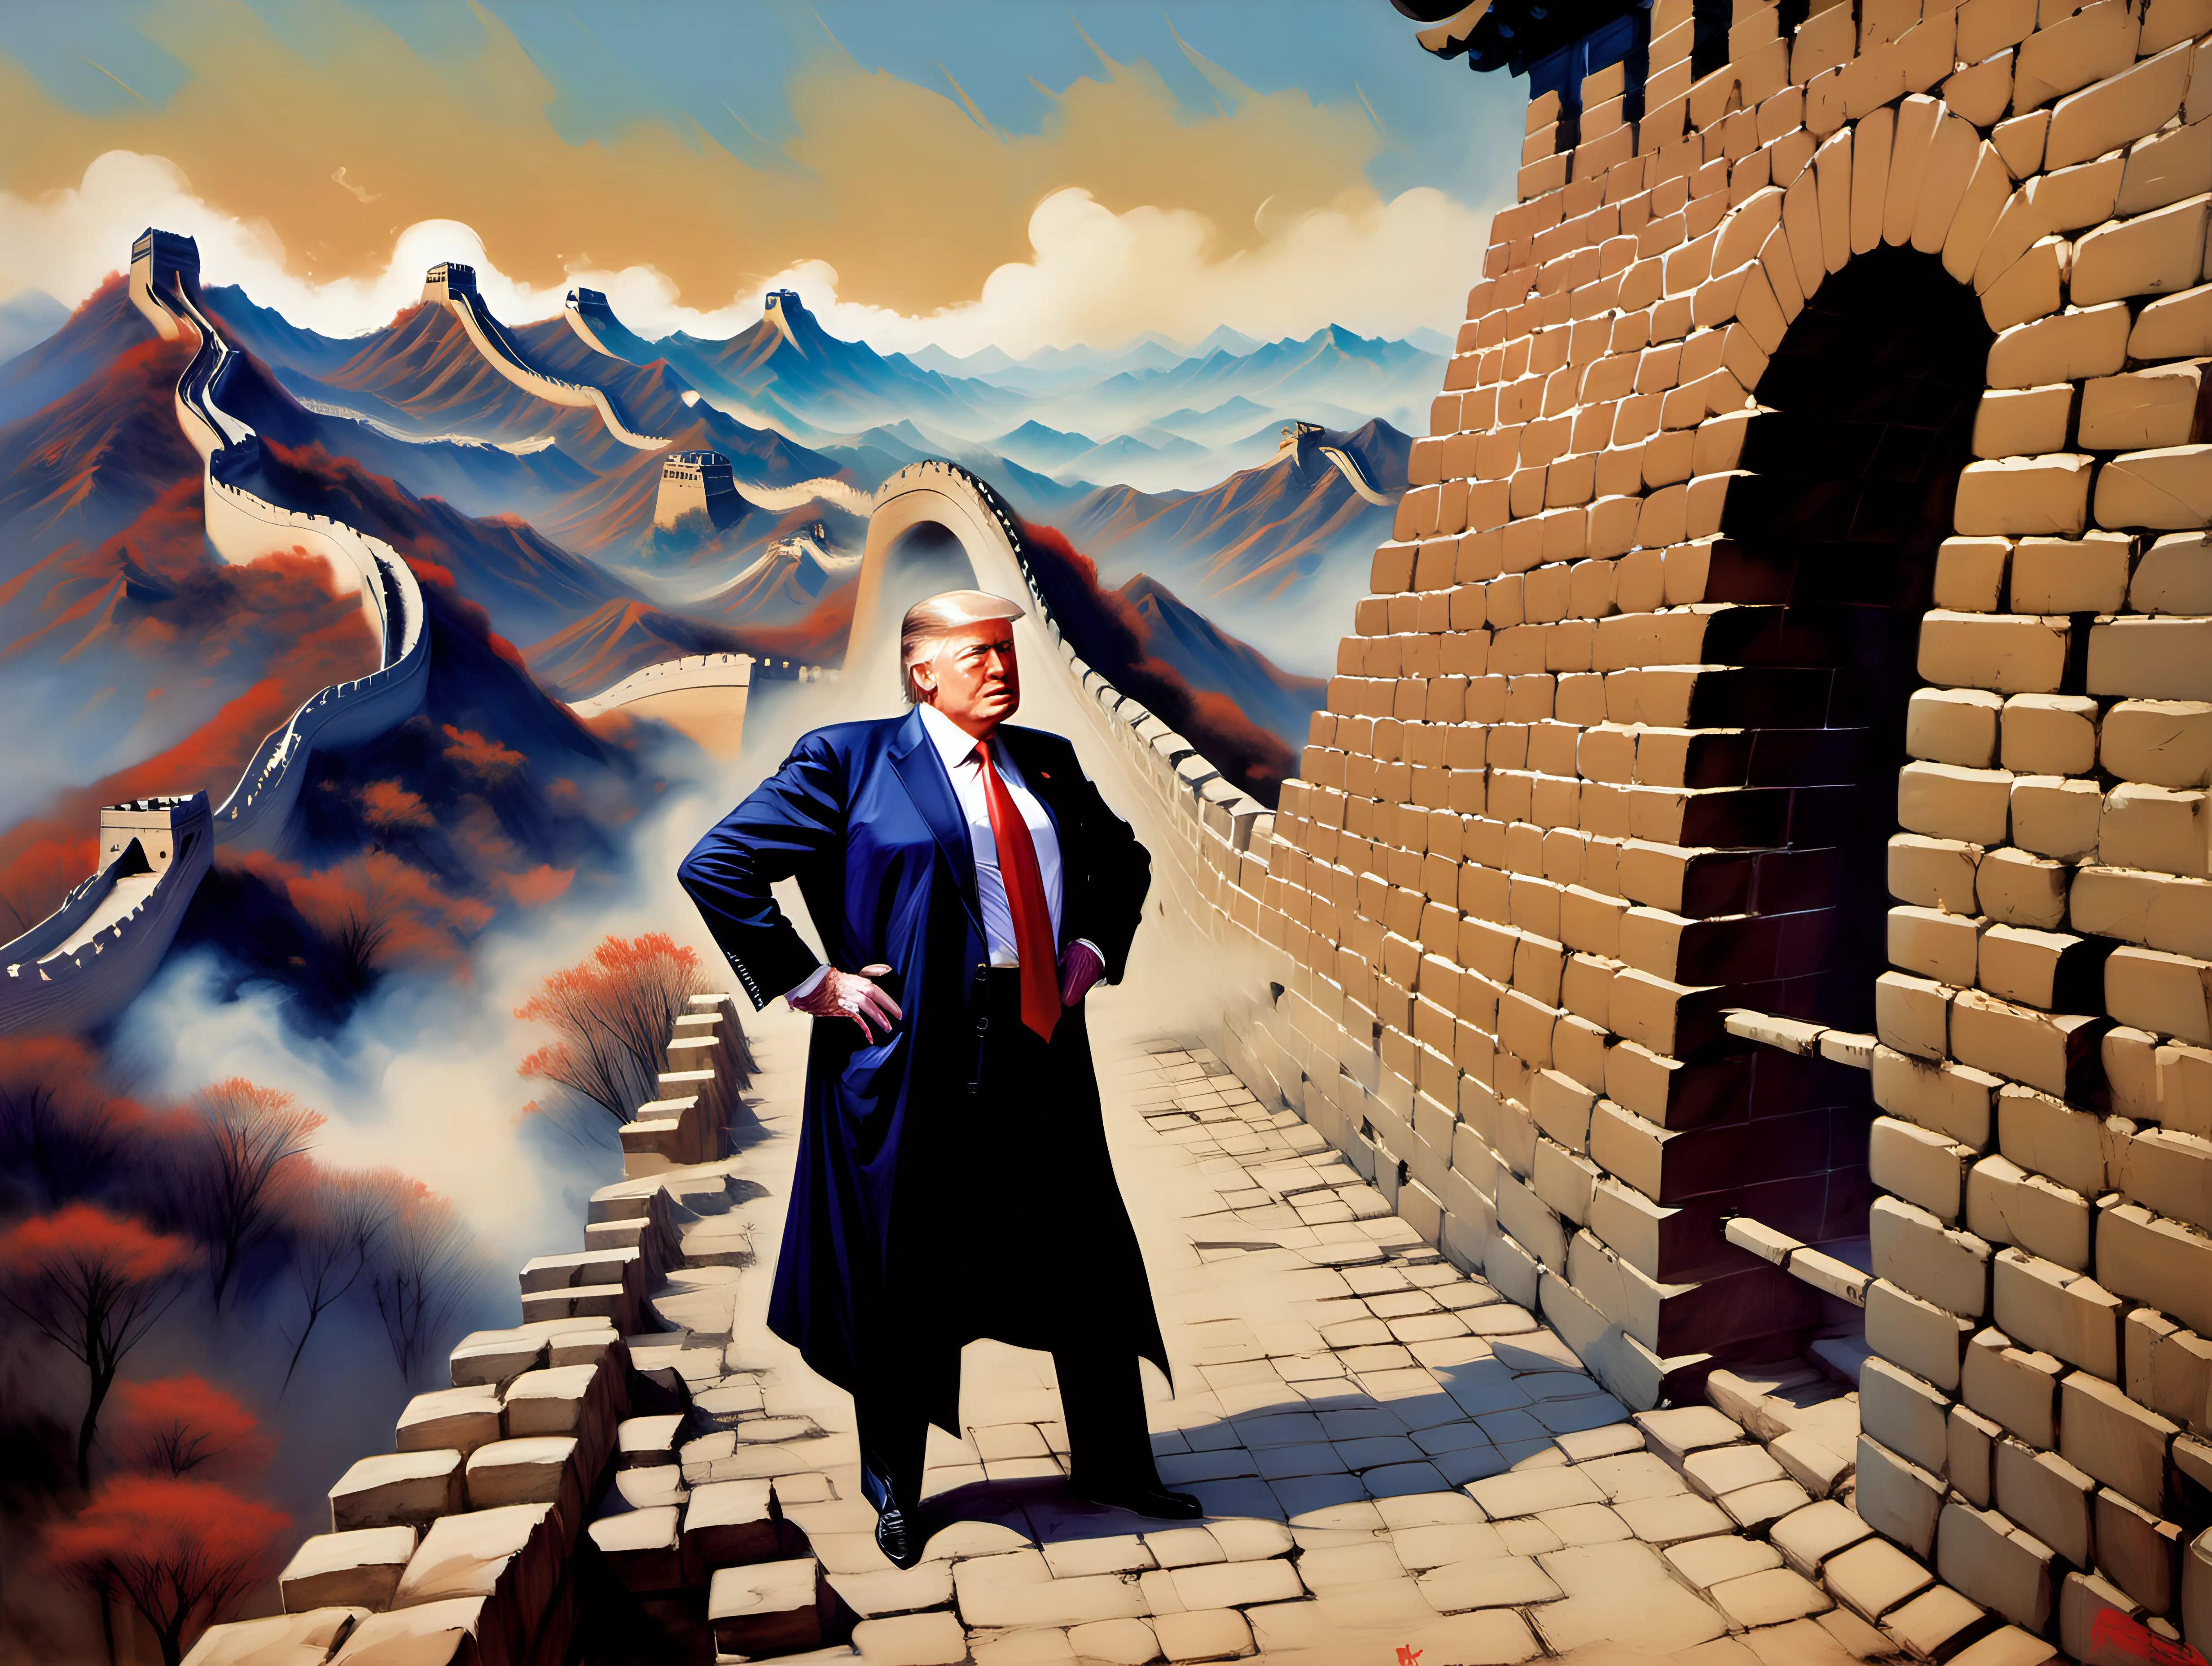 Donald Trump Overseeing the Great Wall Construction in Epic Frank Frazetta Style